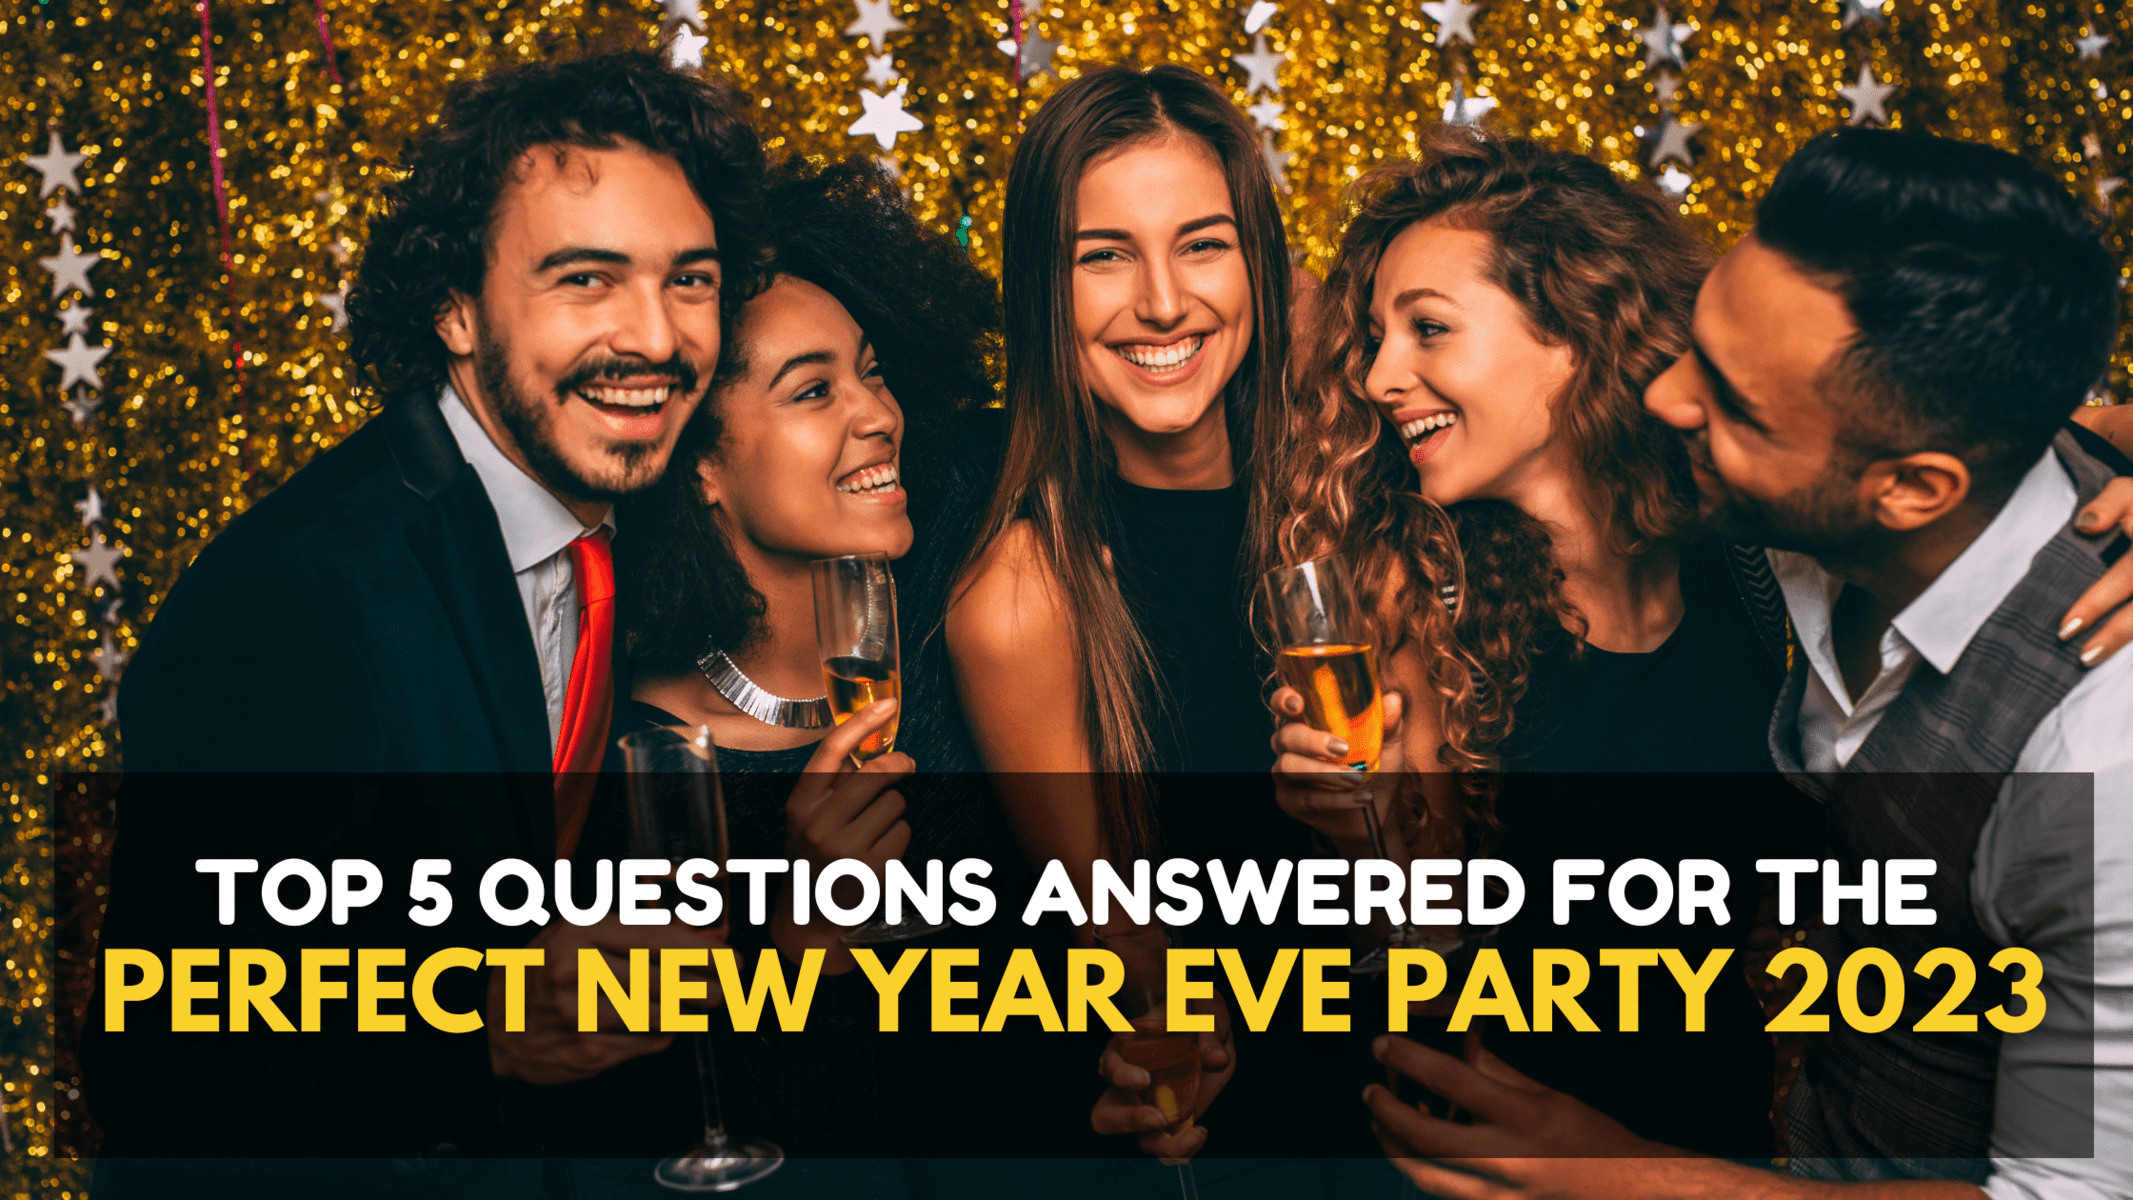 Top 5 Questions Answered for the Perfect New Years Eve Party 2023